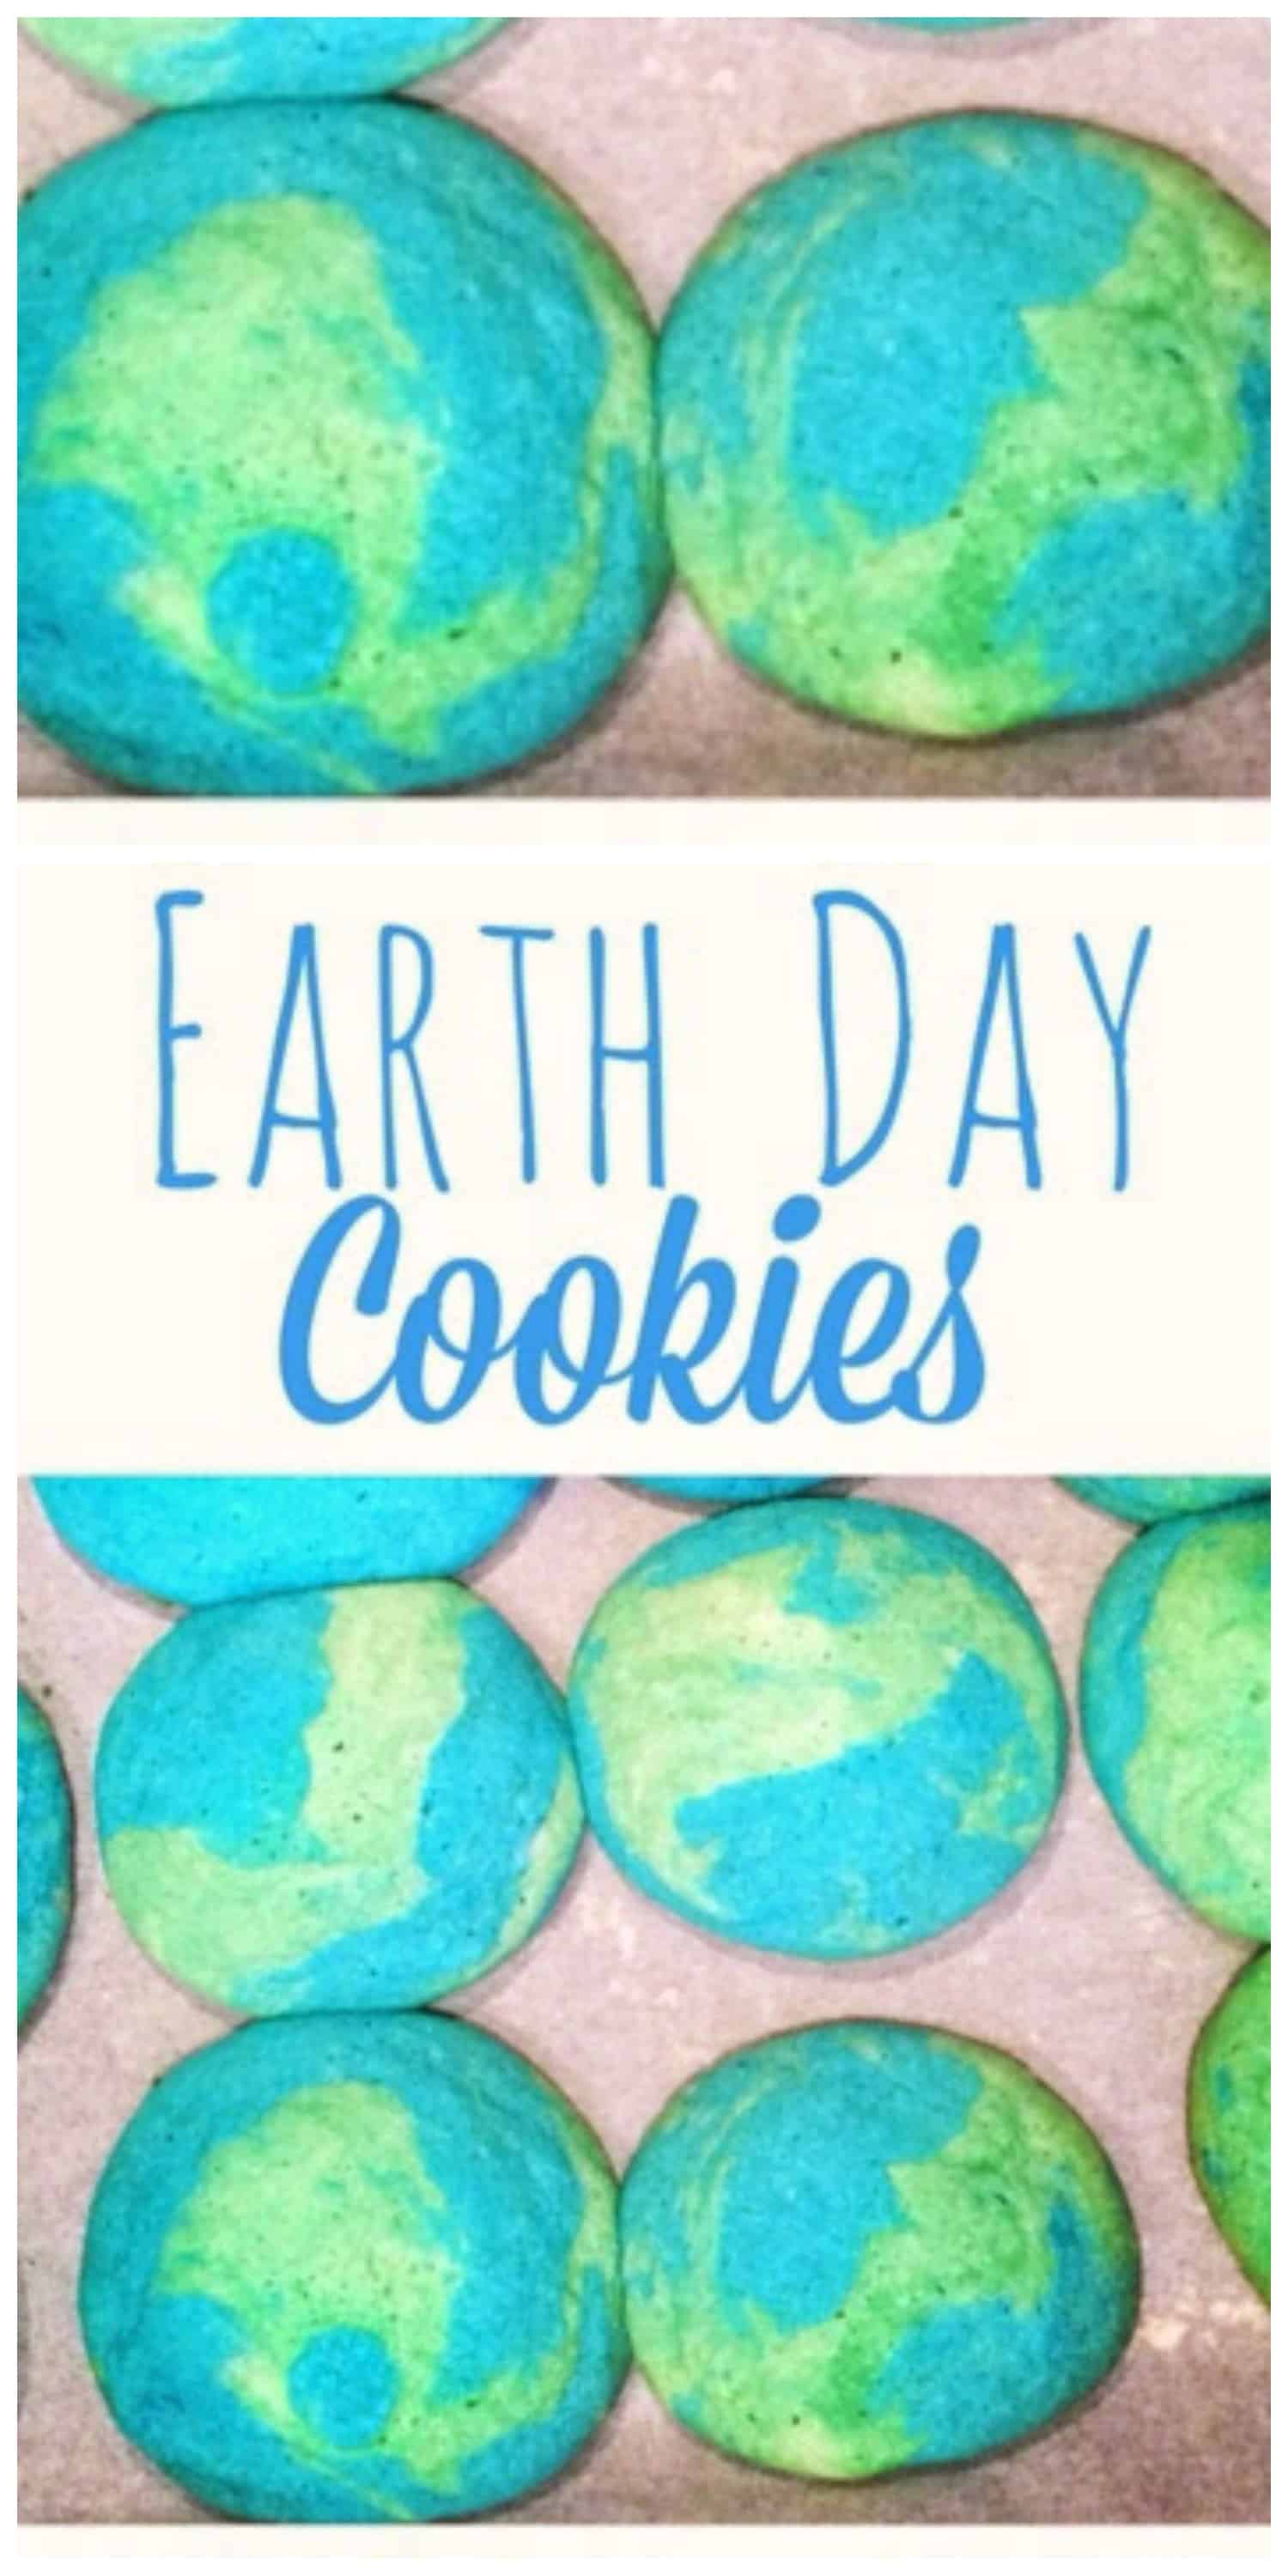 These homemade Earth Day cookies are SO easy to make! Check out just how simple they are!